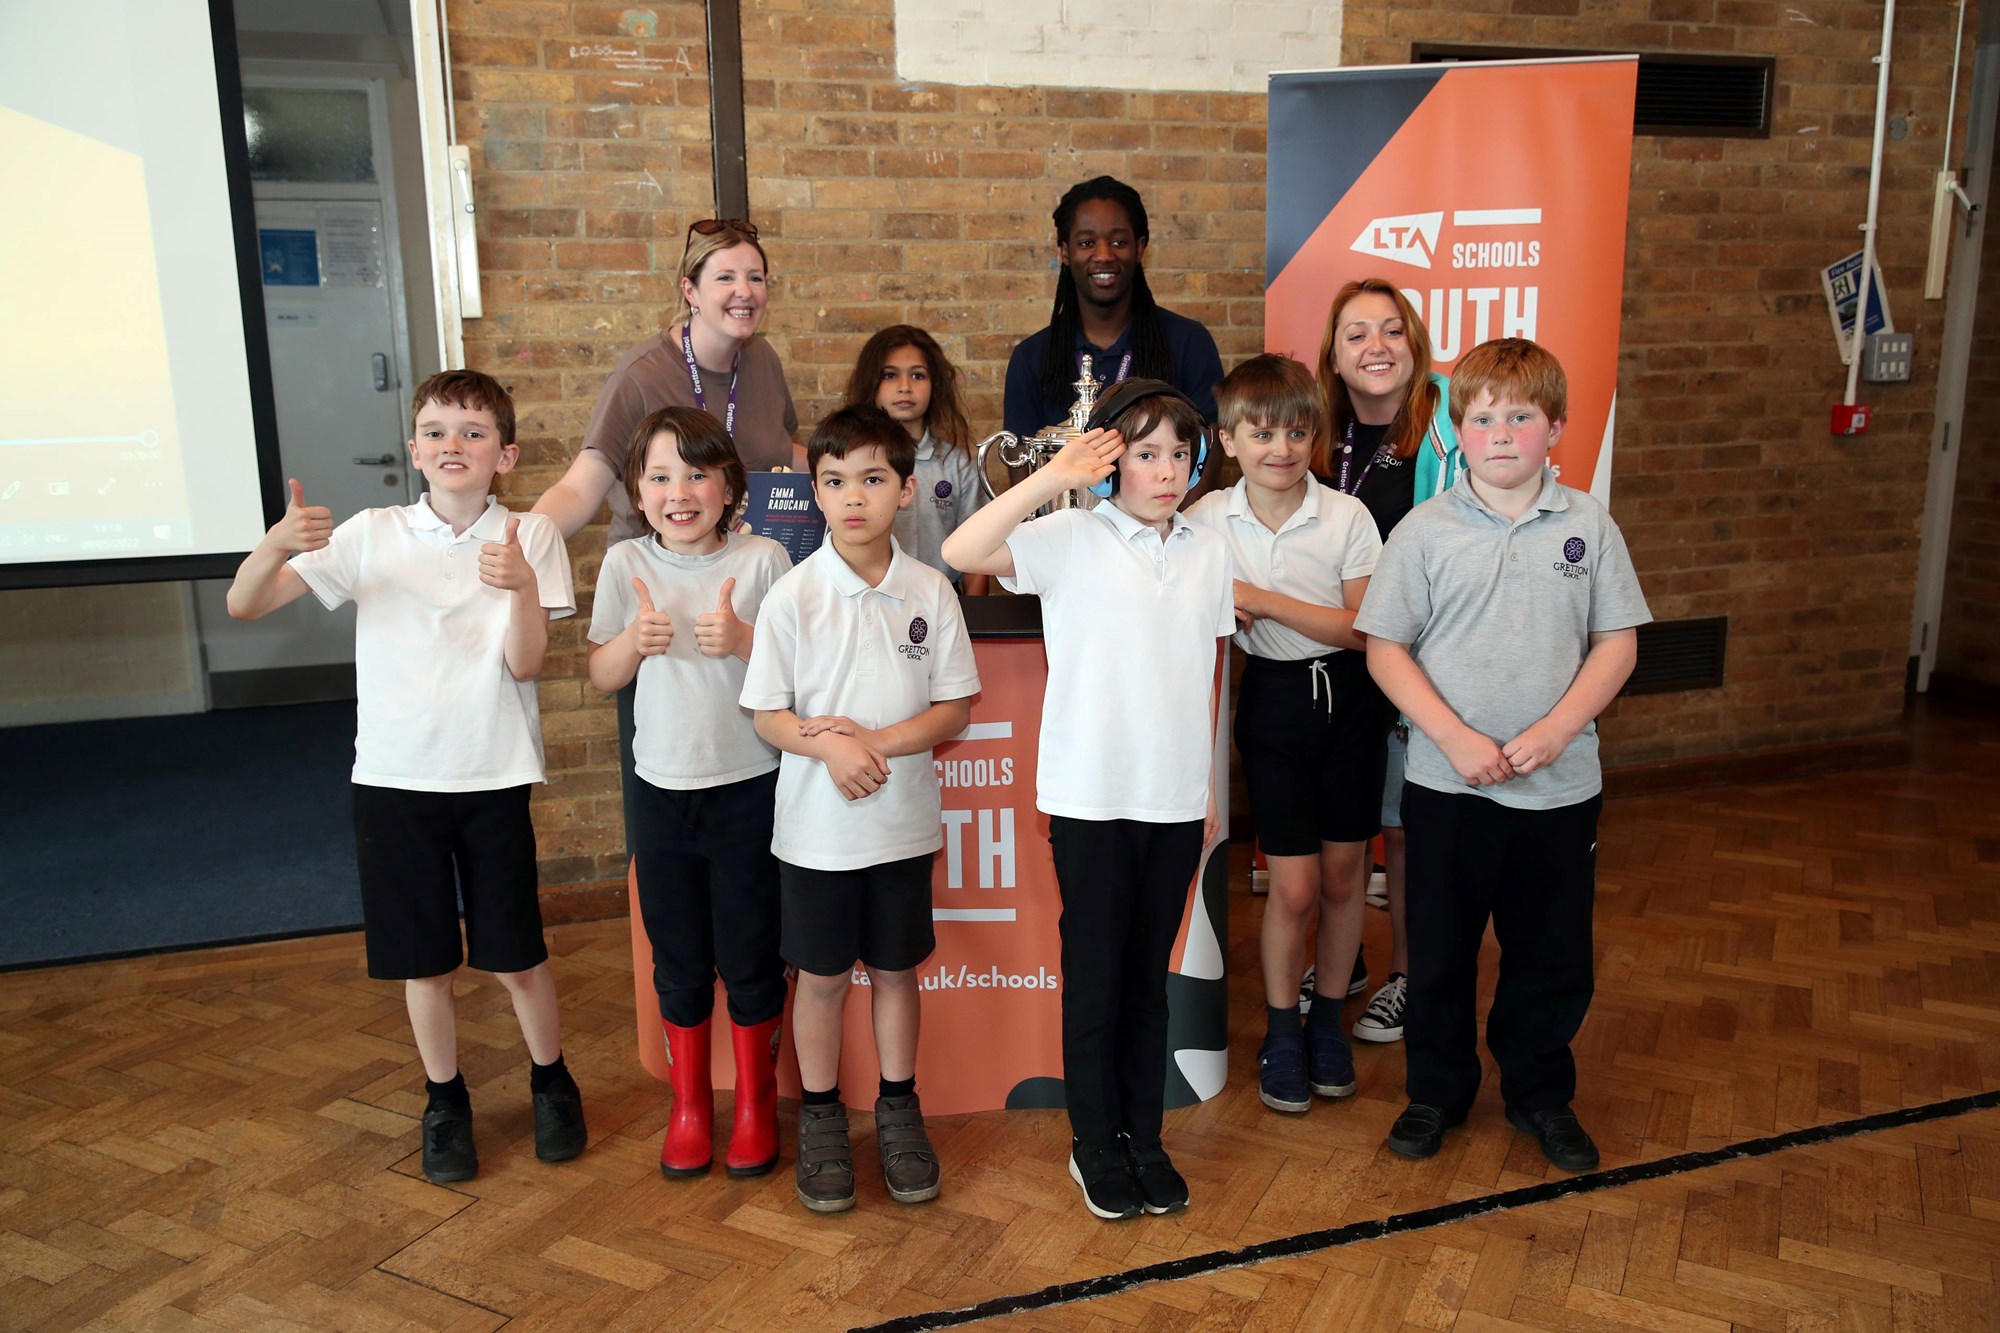 Pupils of Gretton Primary School posing with Emma Raducanu's US Open Trophy Tour